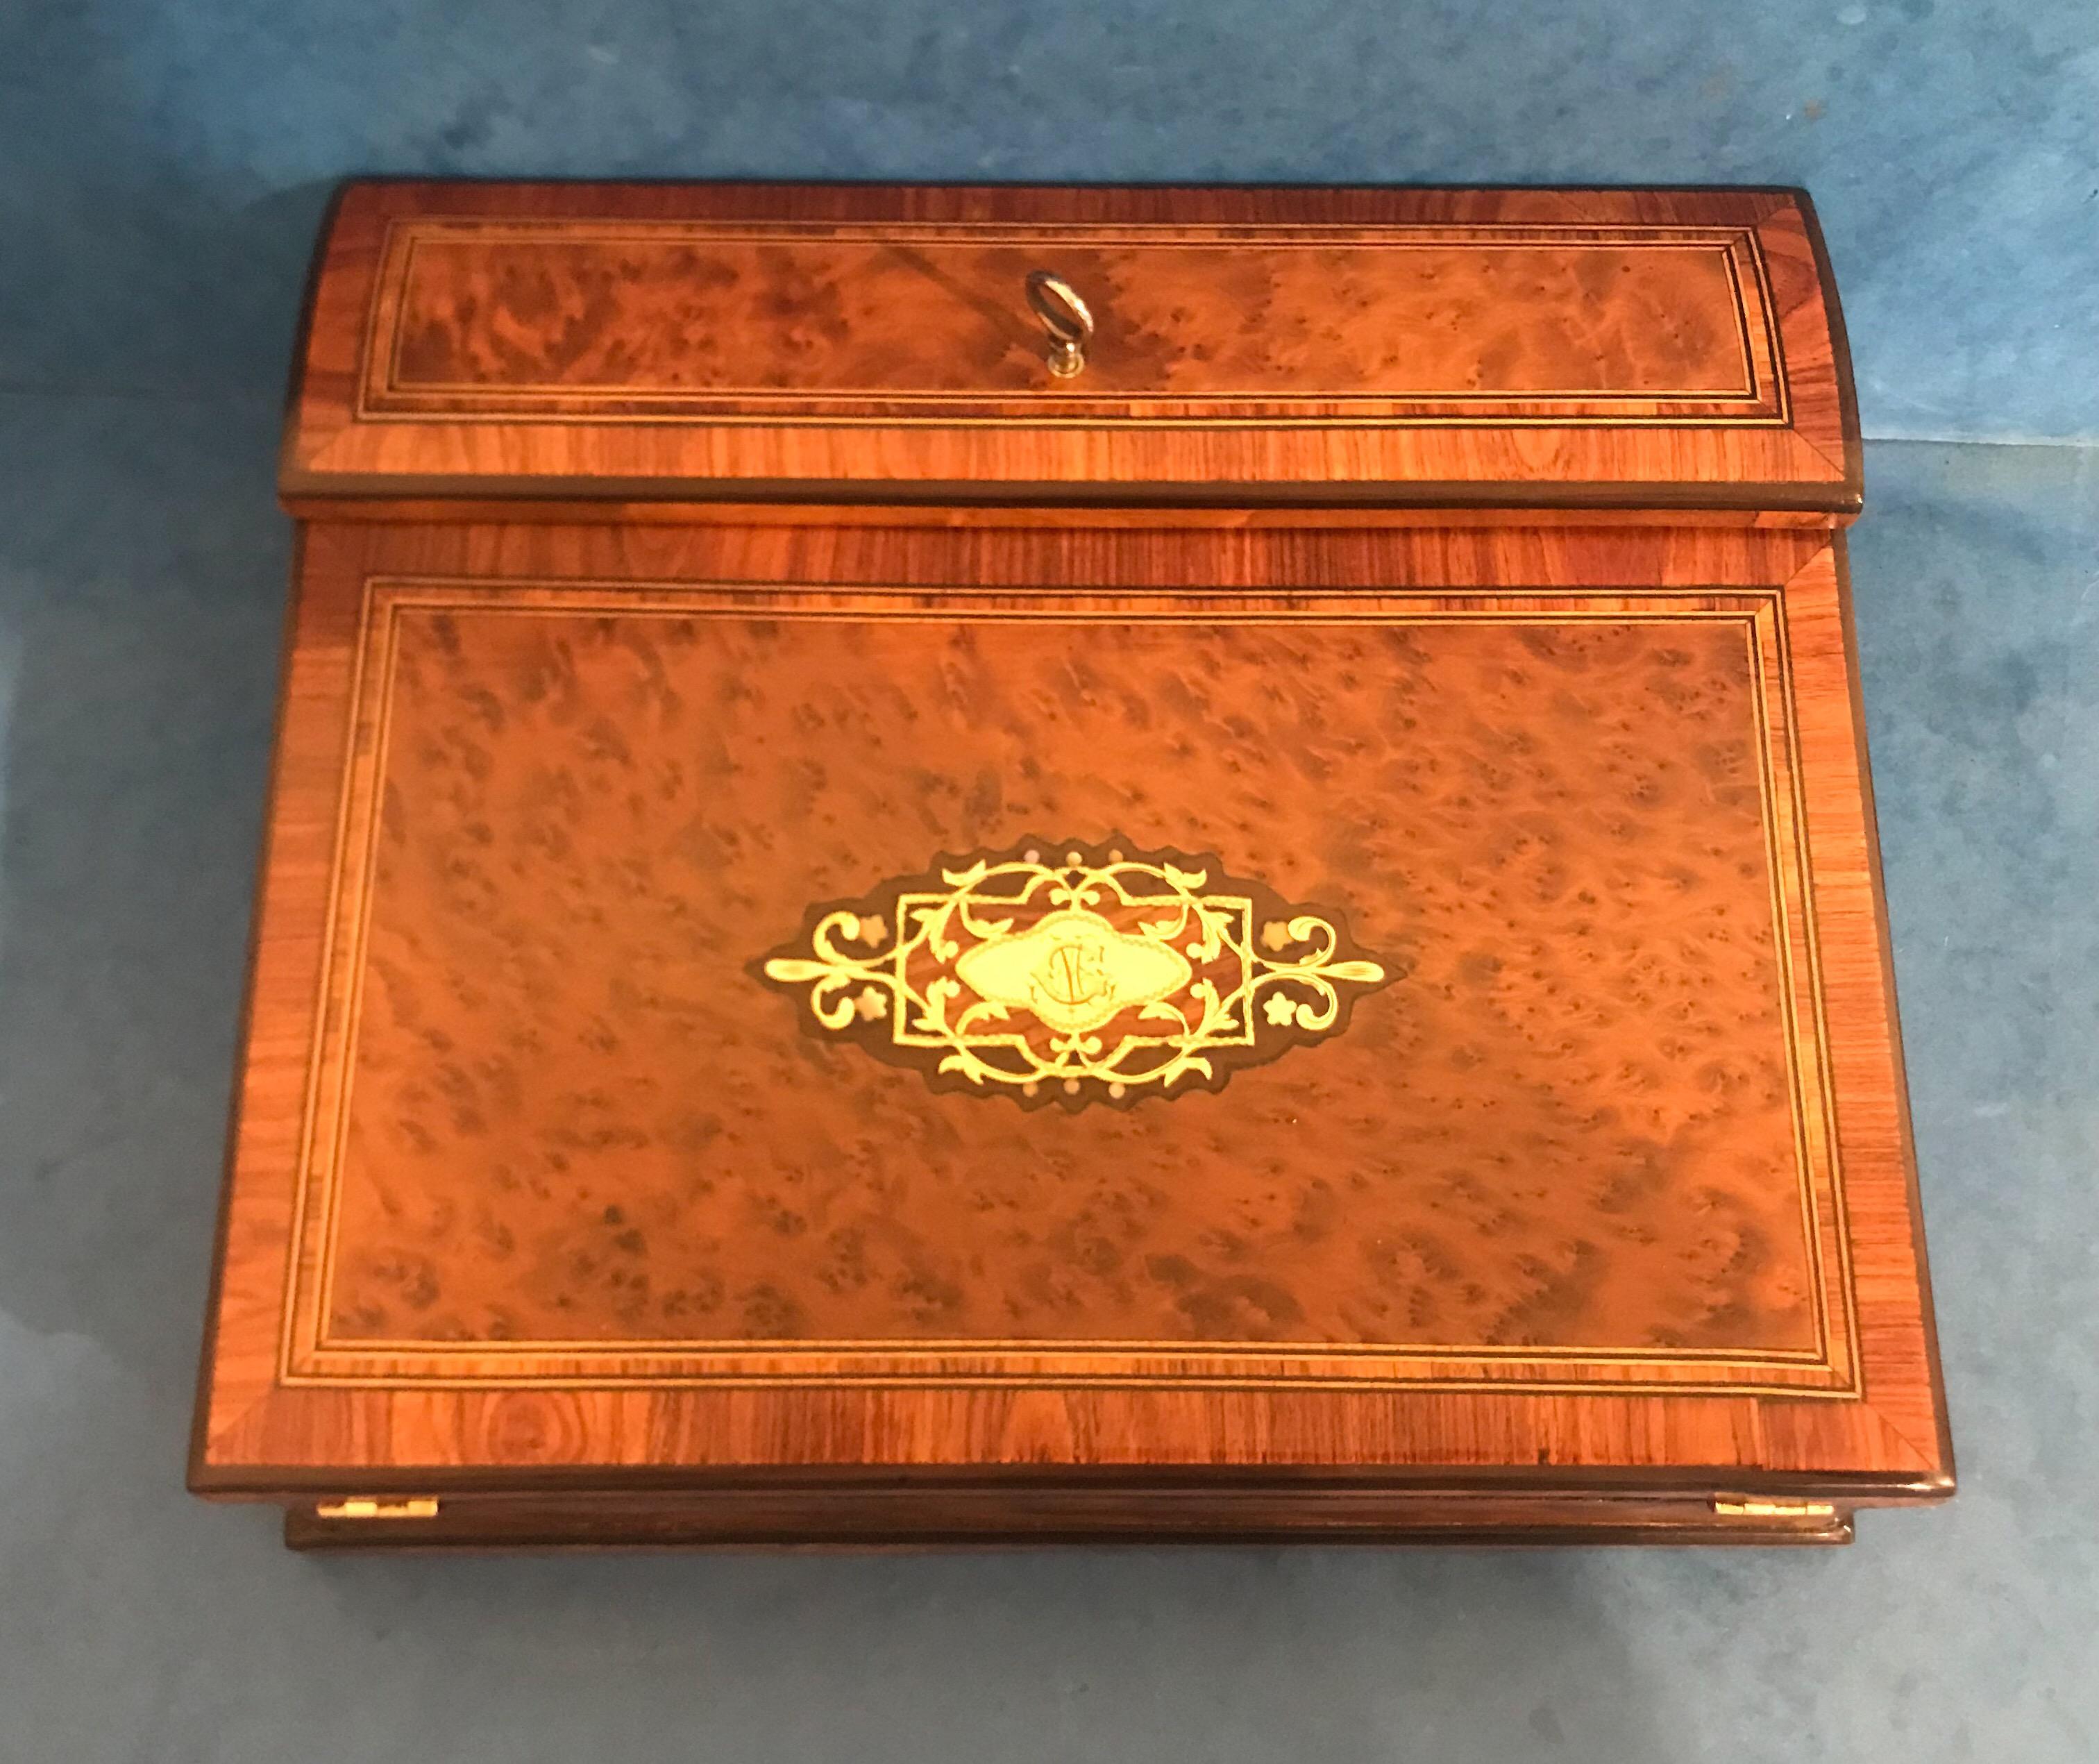 This is a very pretty French Victorian 1870 Burr cedar brass inlaid tulip wood cross banded ladies lap desk, it has a rosewood interior, its original velvet writing surface ,original silver plated ink wells and original working lock and original